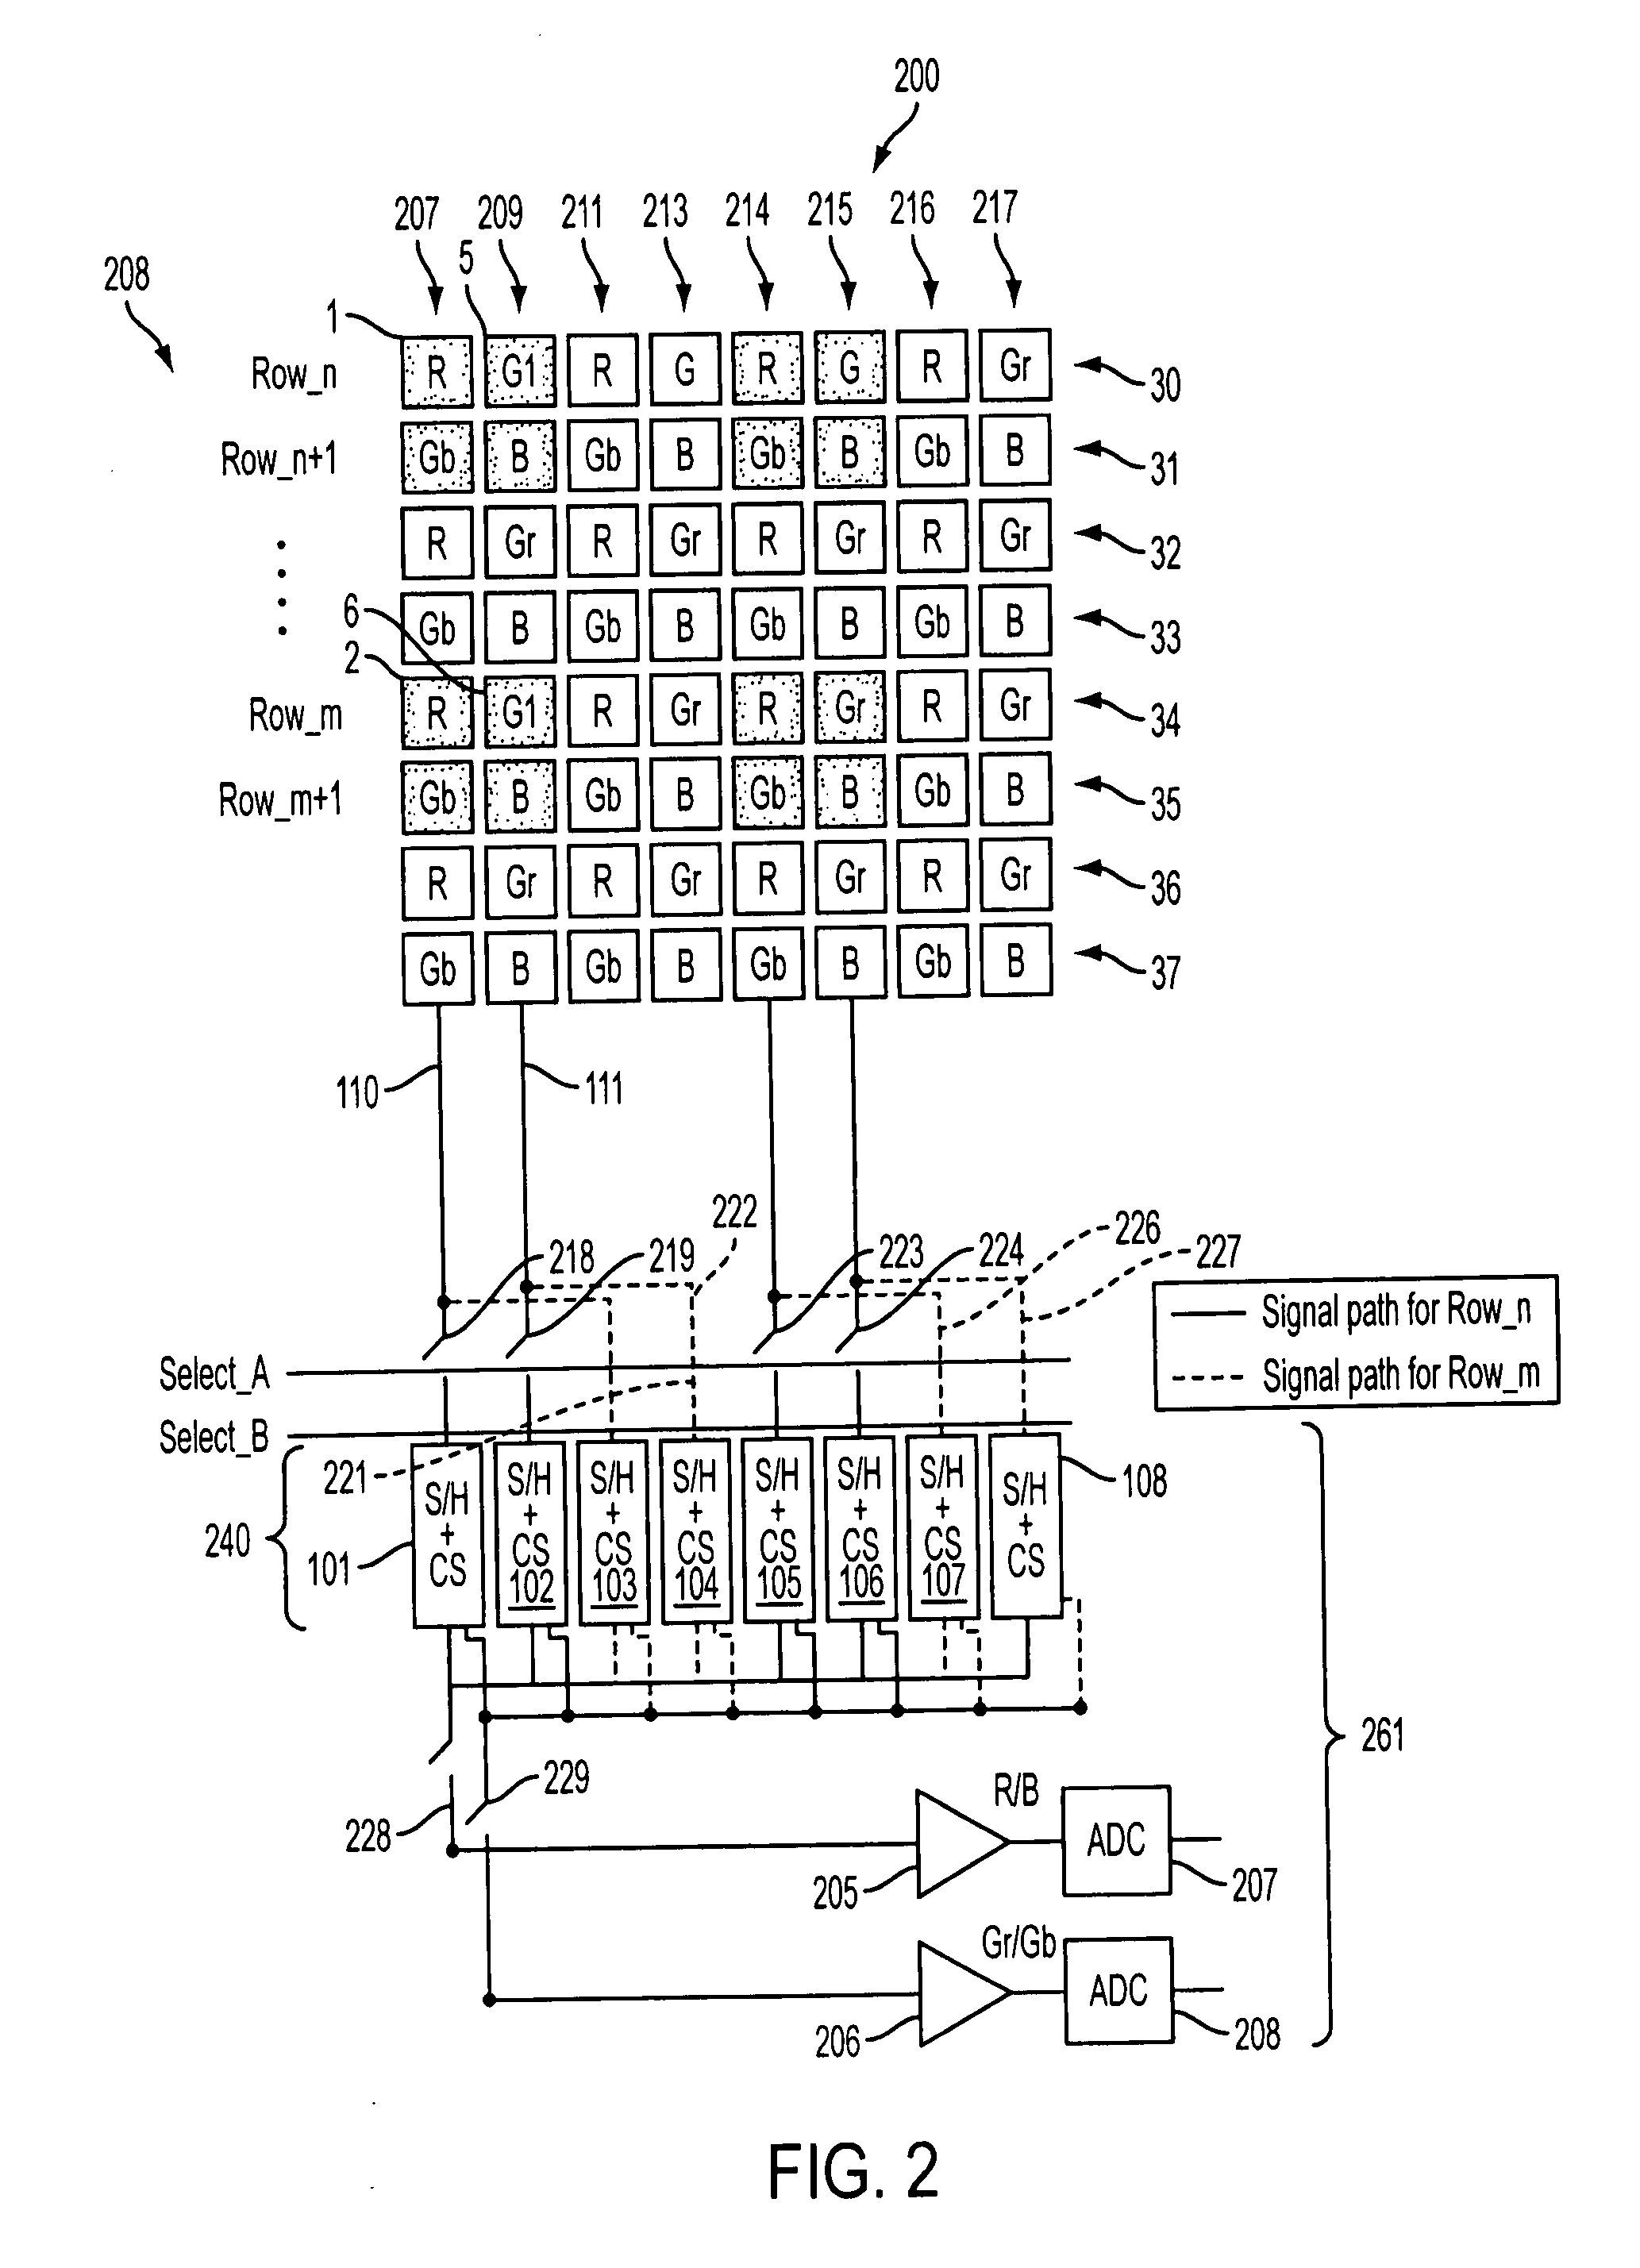 Imager methods, apparatuses, and systems providing a skip mode with a wide dynamic range operation